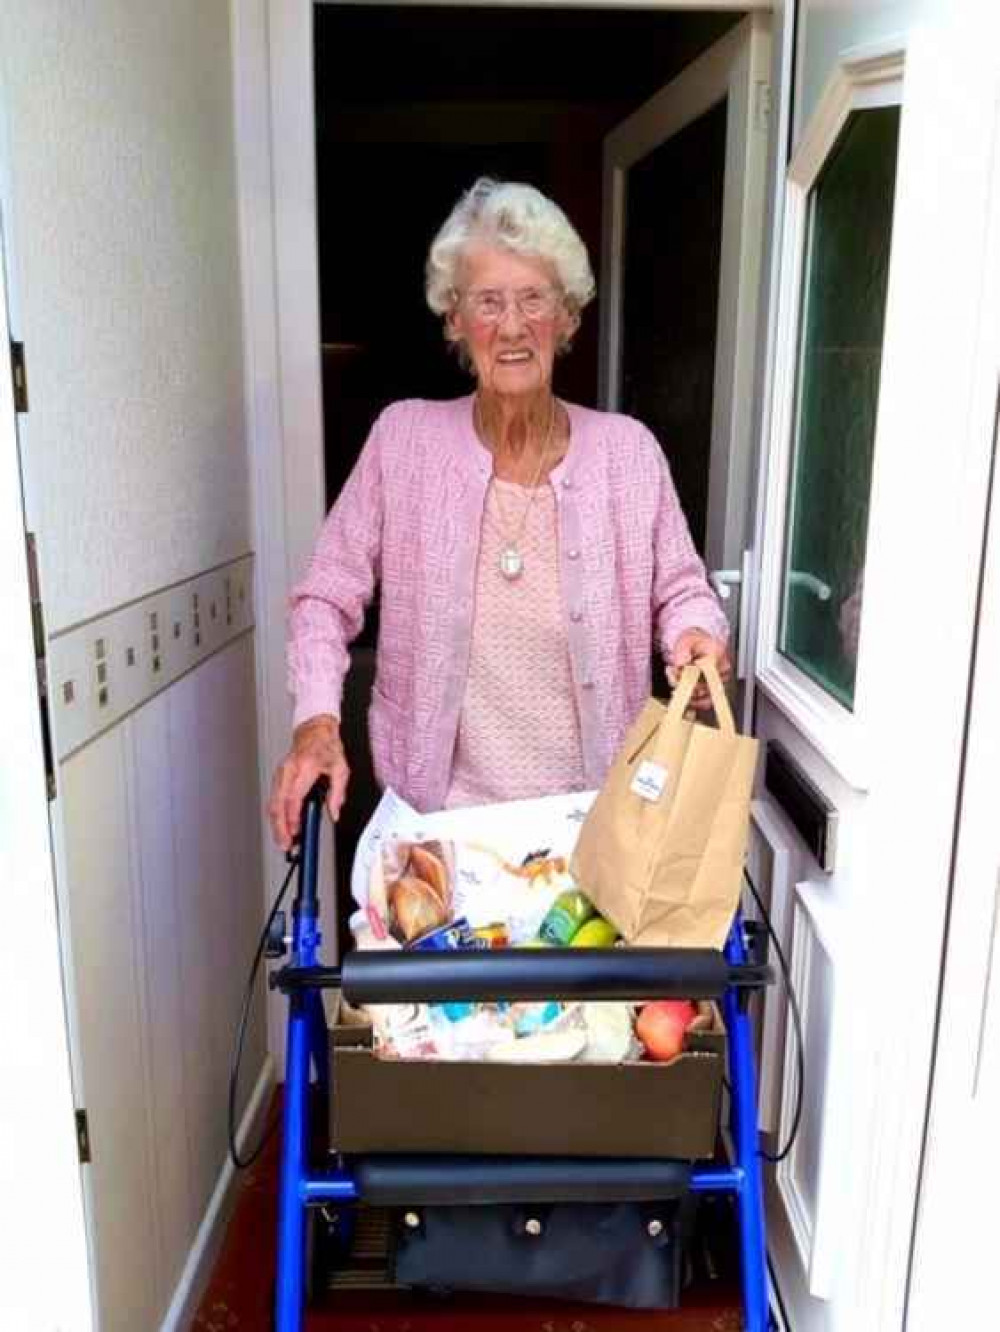 Ada receiving food parcel from Age UK.